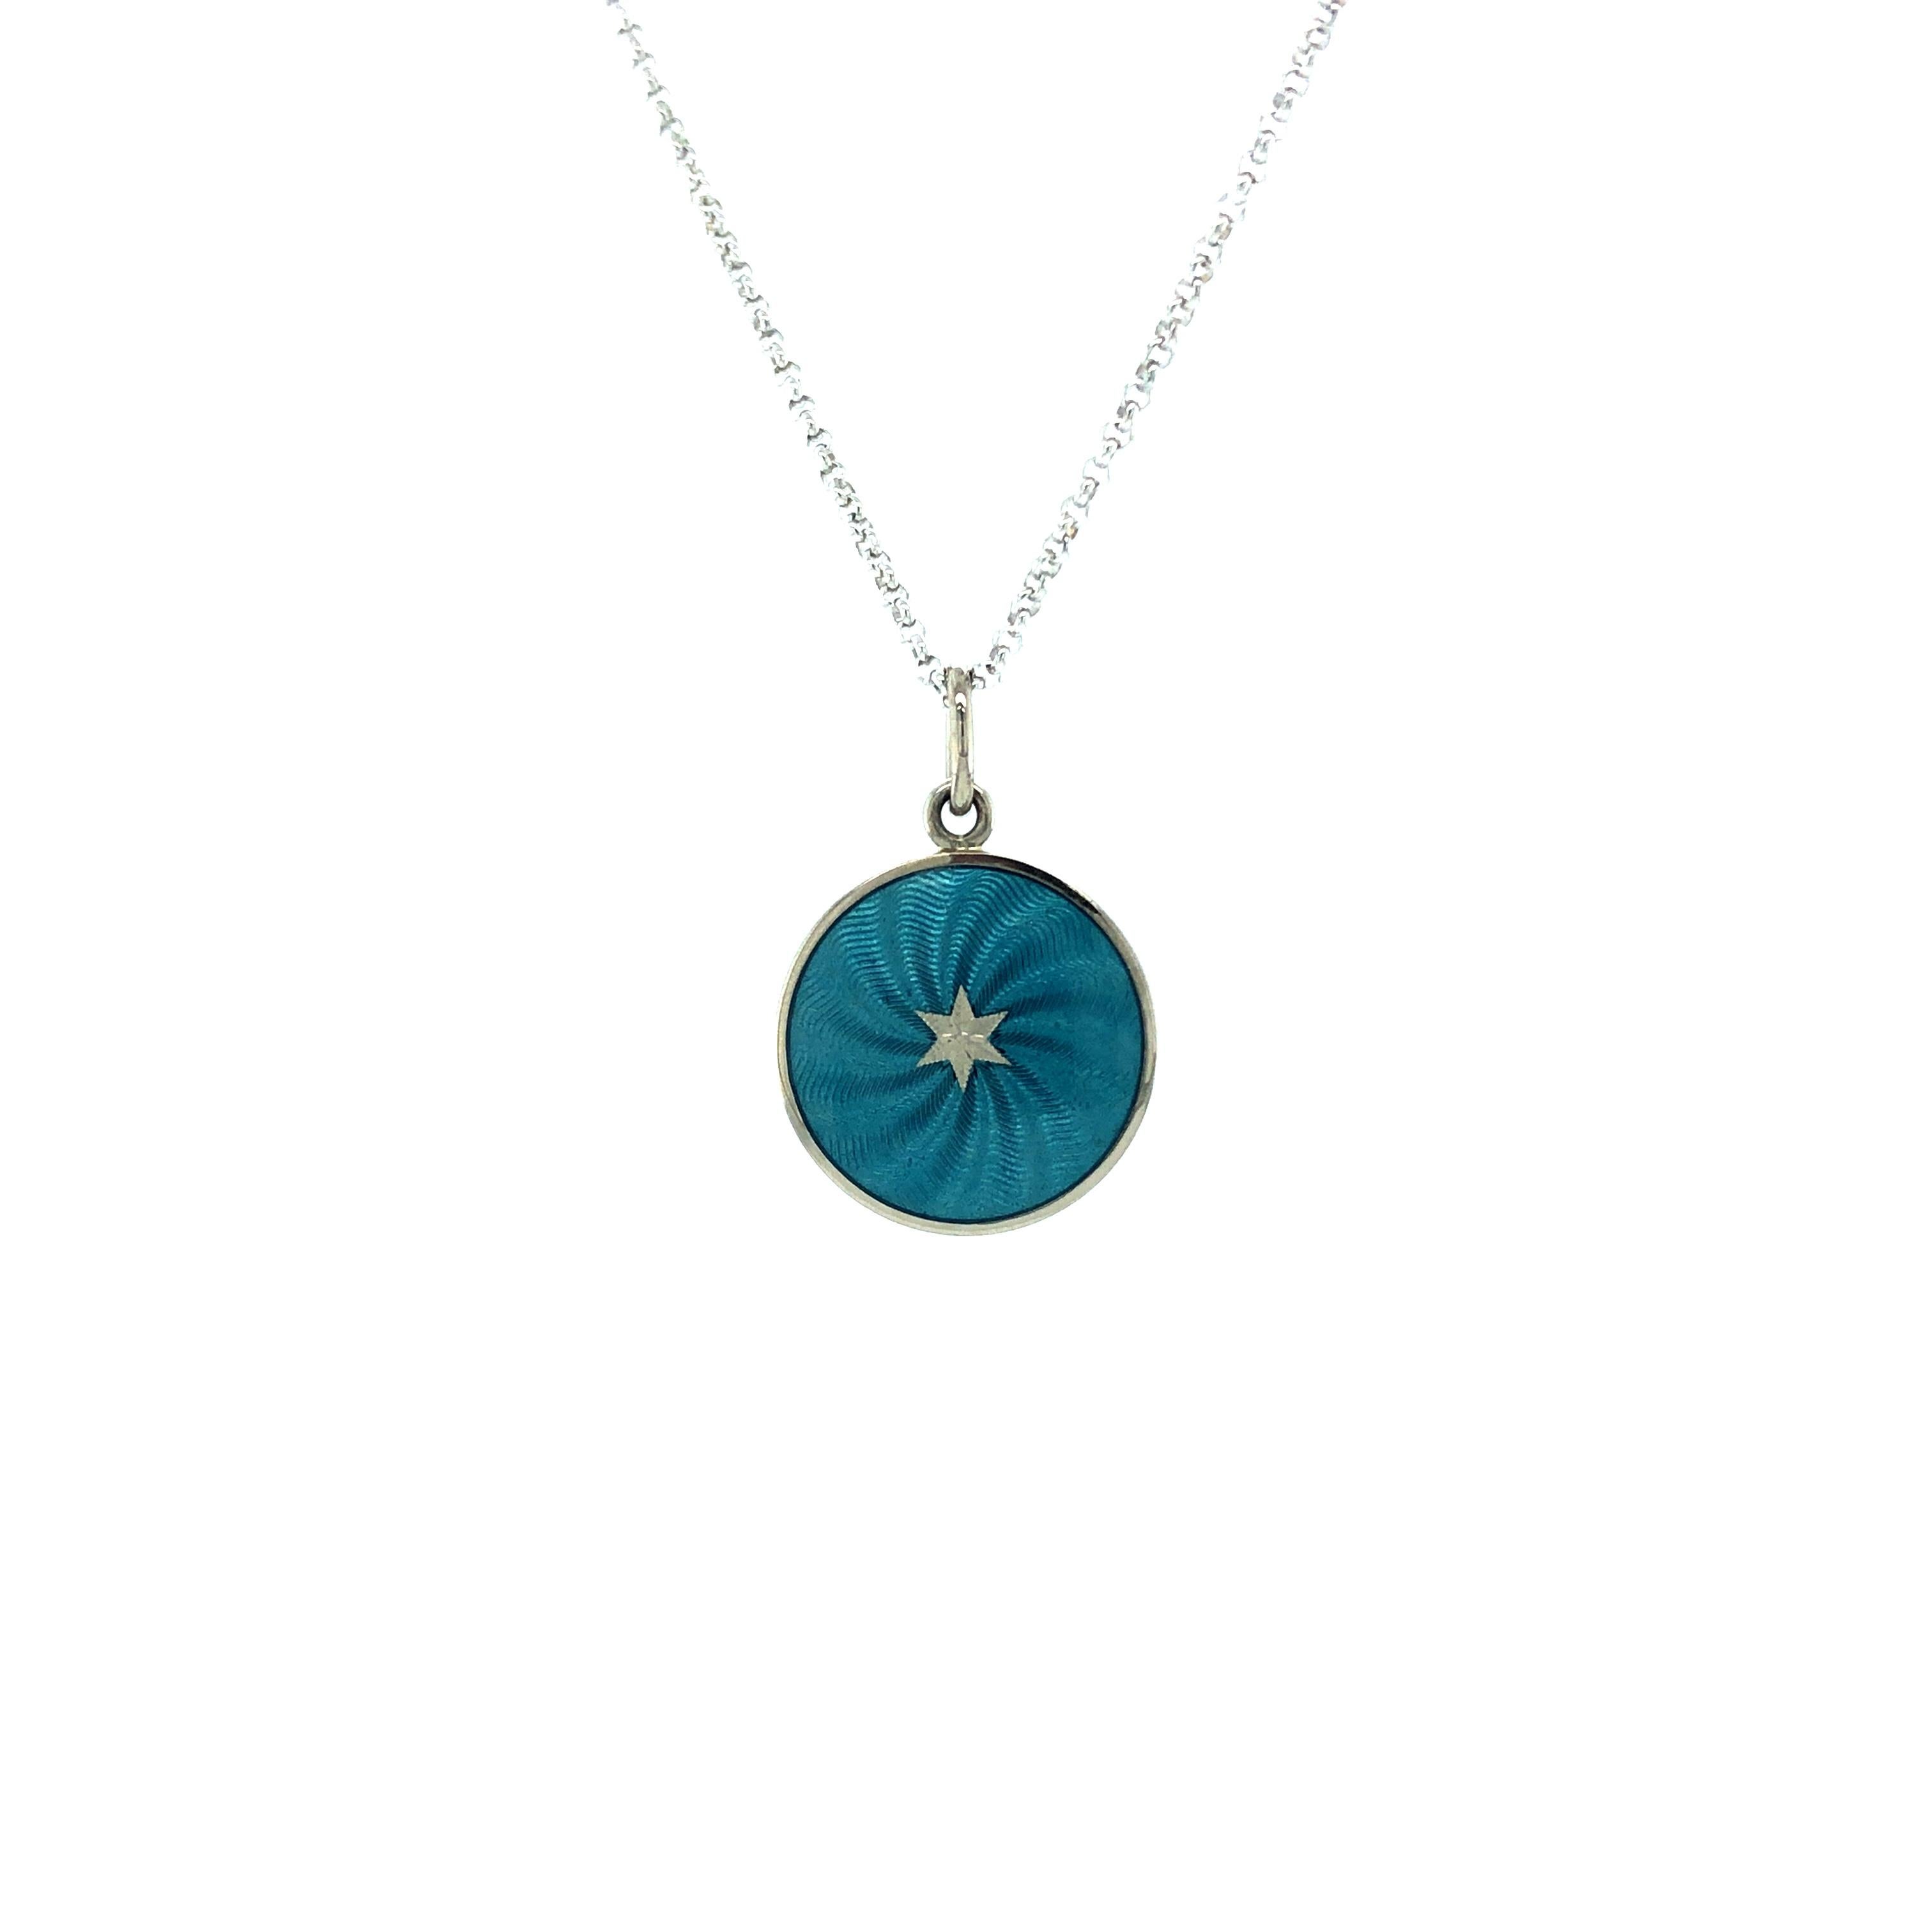 Victor Mayer round disk pendant 18k white gold, Diskos collection, translucent turquoise vitreous enamel, guilloche with star paillon, diameter app. 15.0 mm

About the creator Victor Mayer
Victor Mayer is internationally renowned for elegant